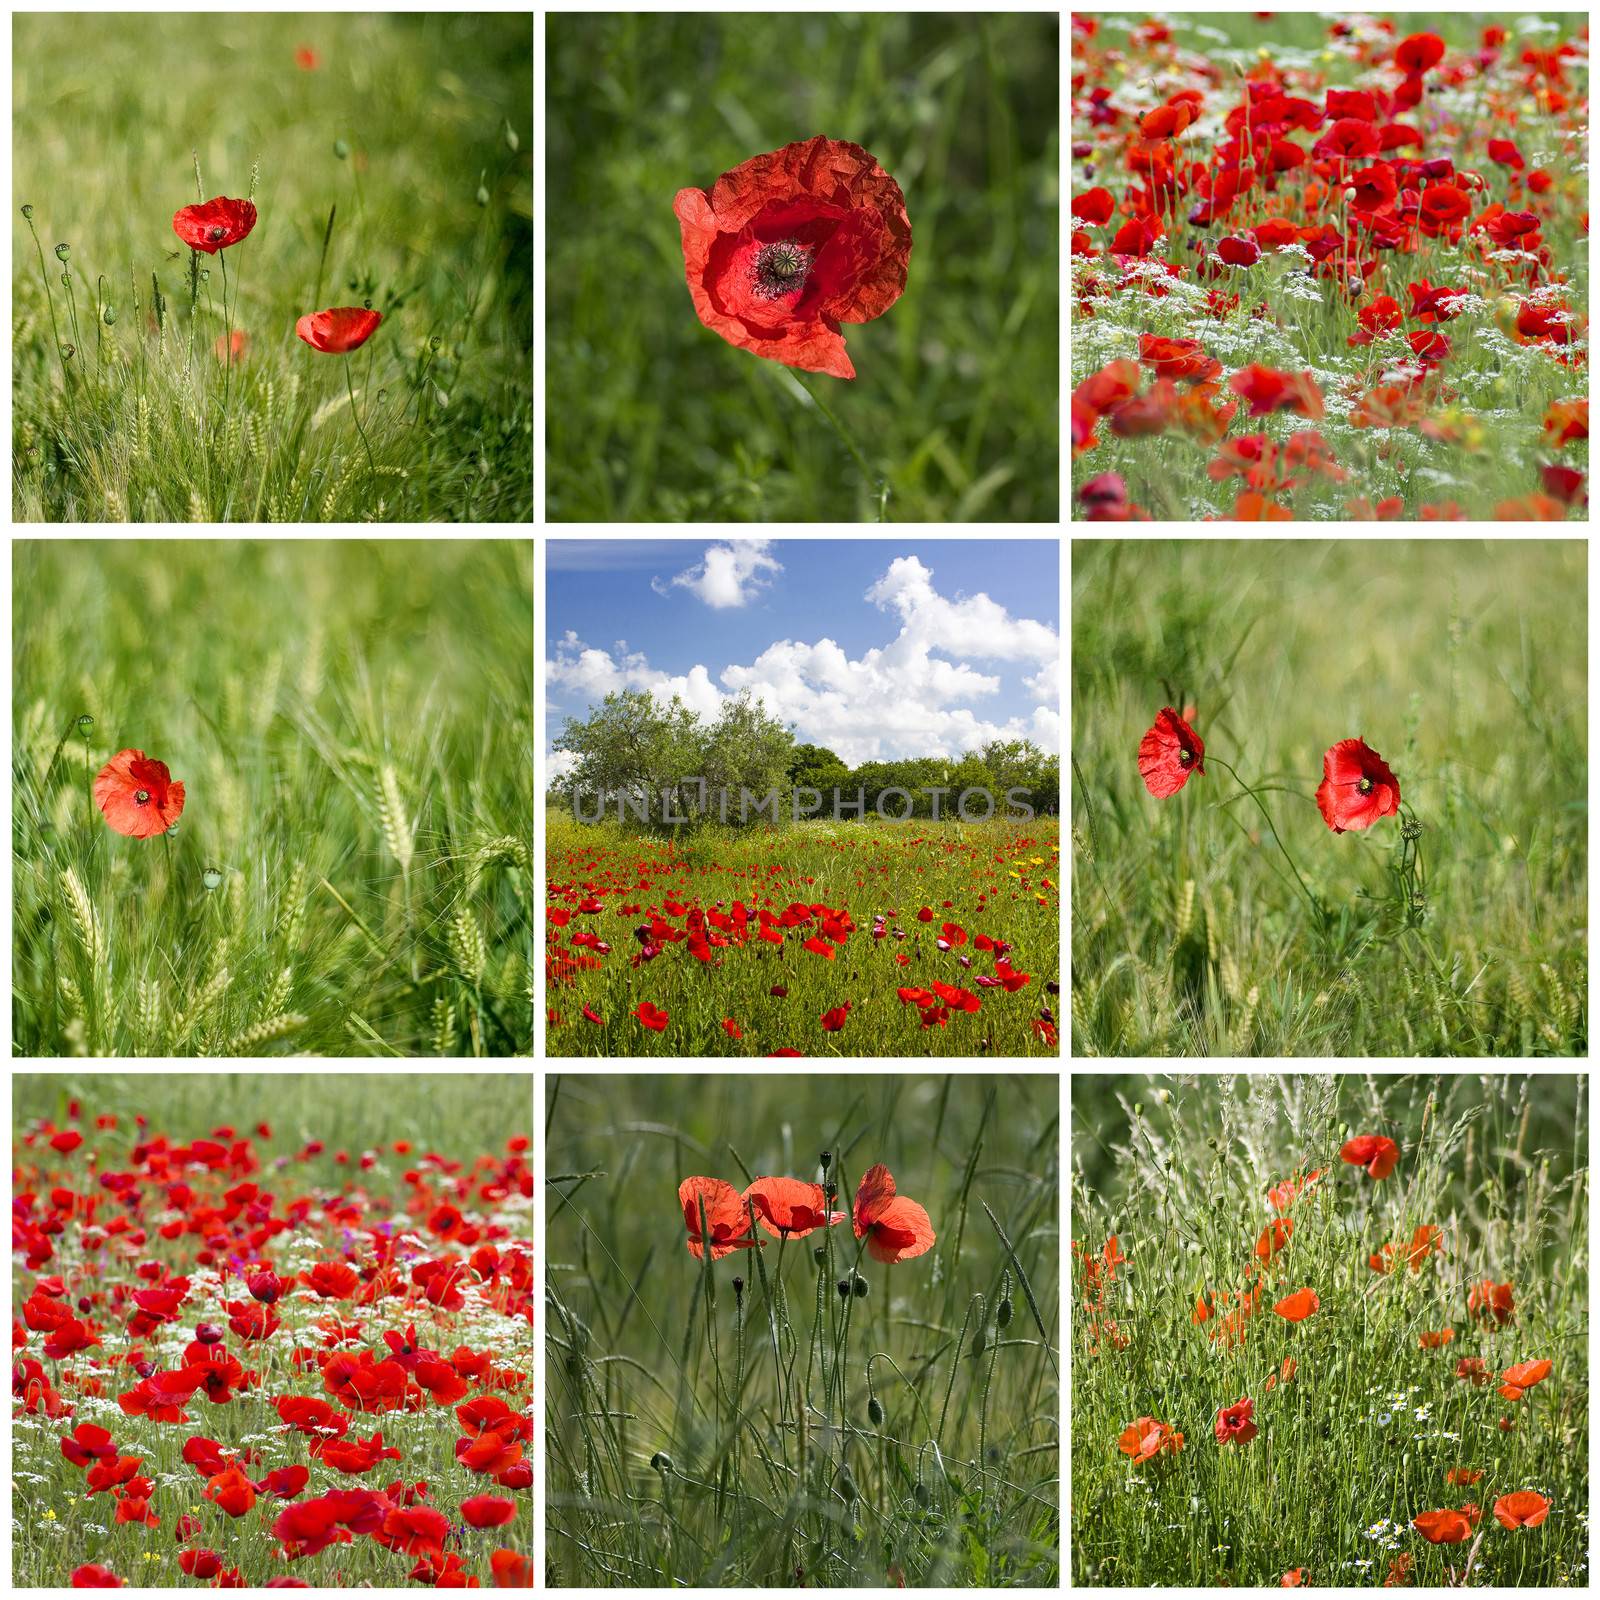 red poppies in Tuscany - collage